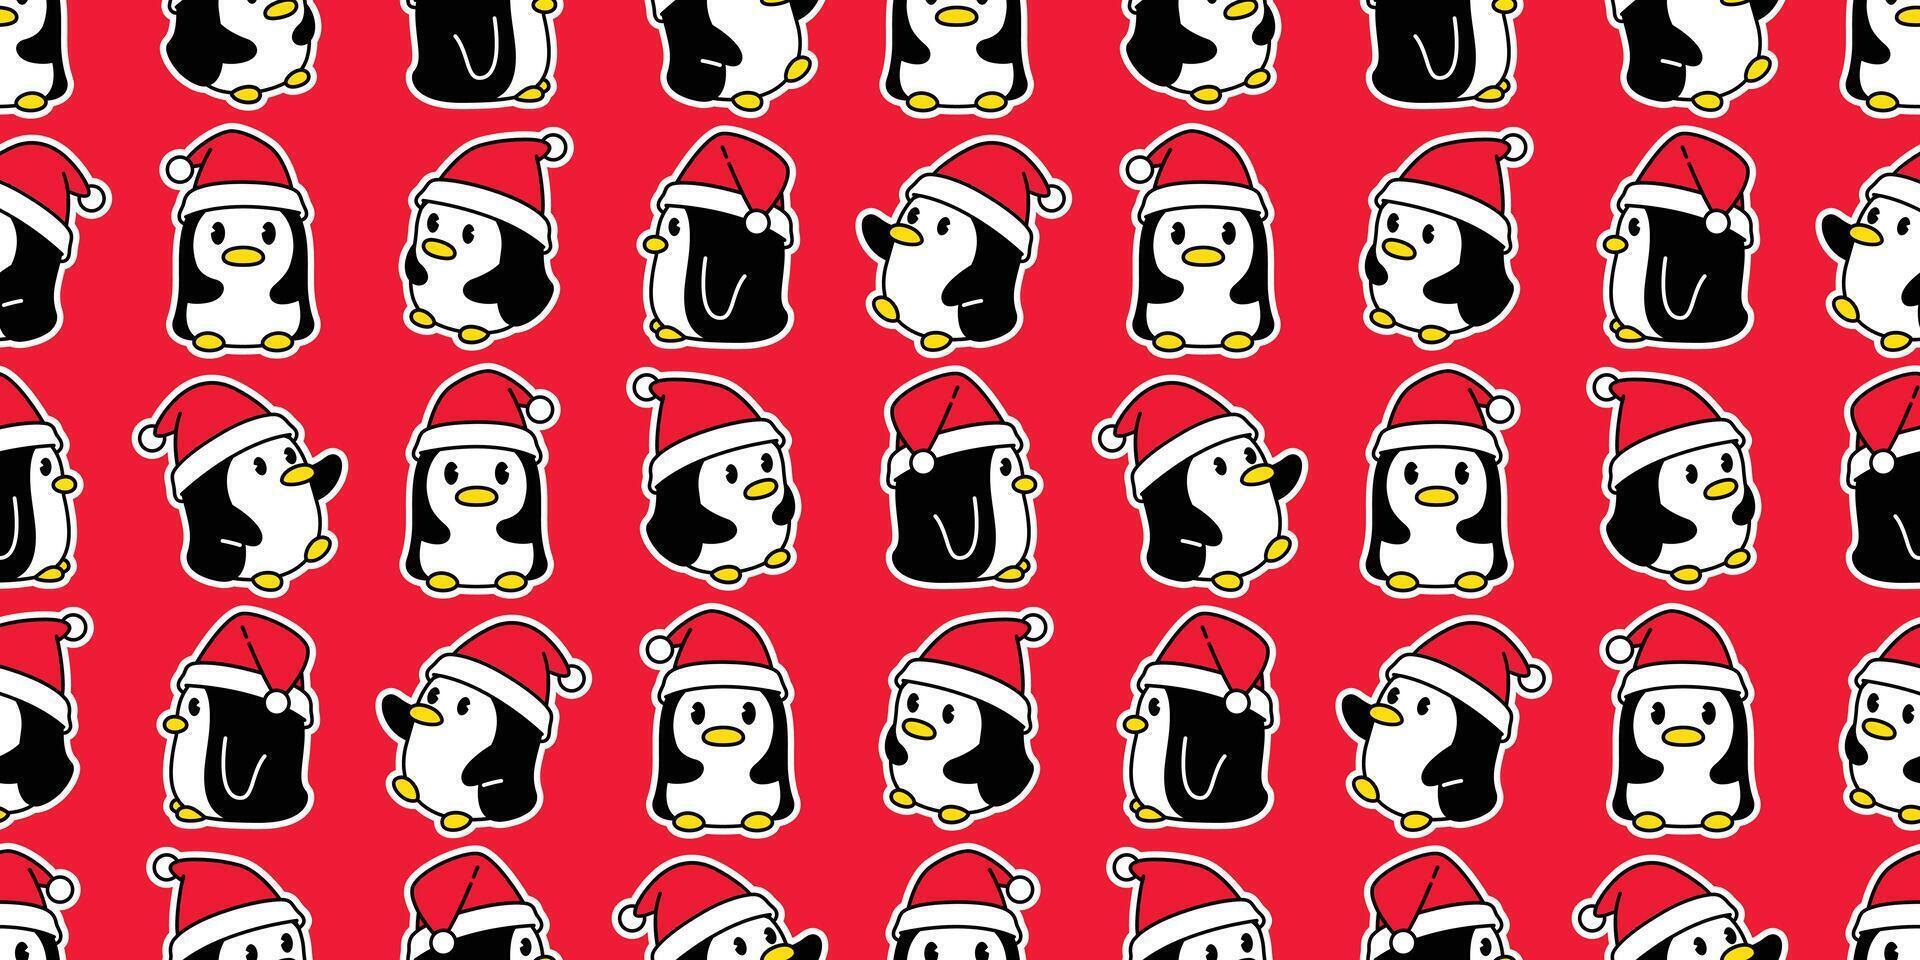 penguin Seamless pattern christmas santa claus hat bird cartoon scarf isolated tile background repeat wallpaper illustration doodle red design vector